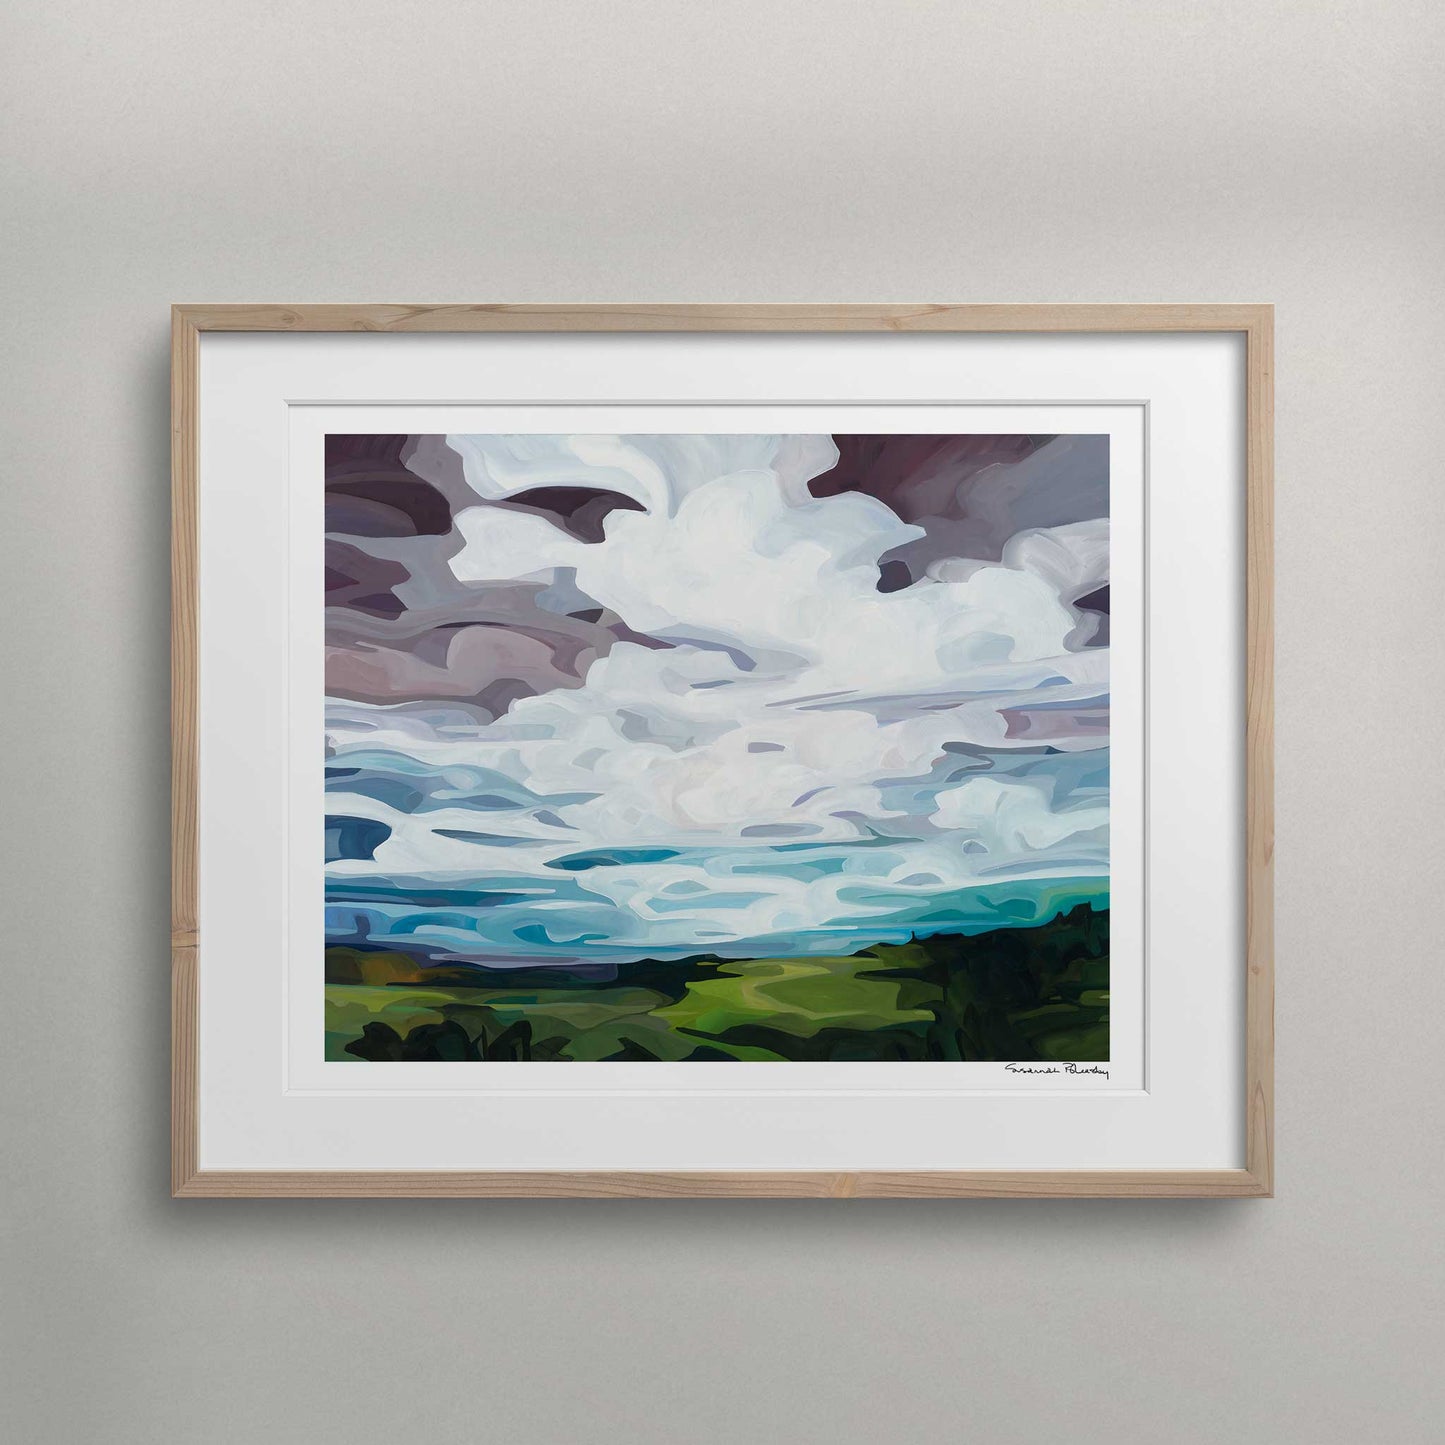 framed horizontal art print of an acrylic abstract painting of a landscape with a bright turquoise cloud-filled evening sky